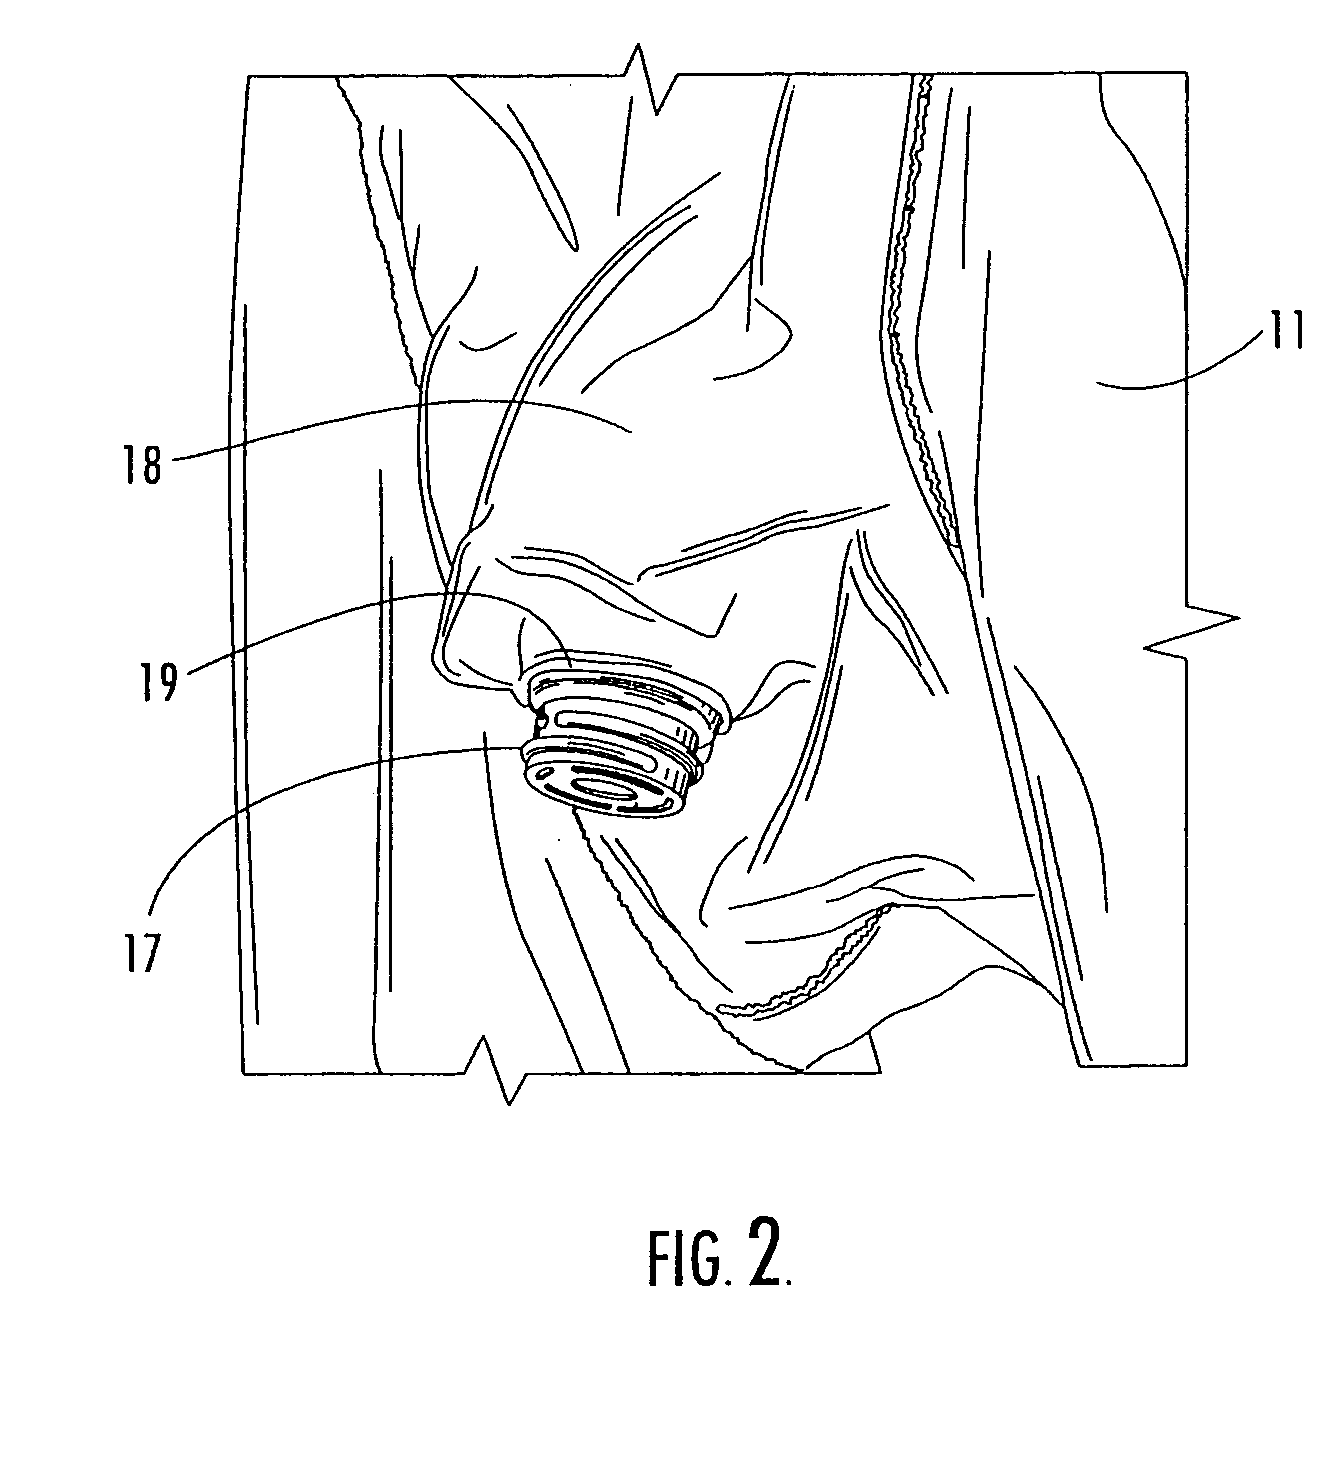 Receptacle for a male incontinence device